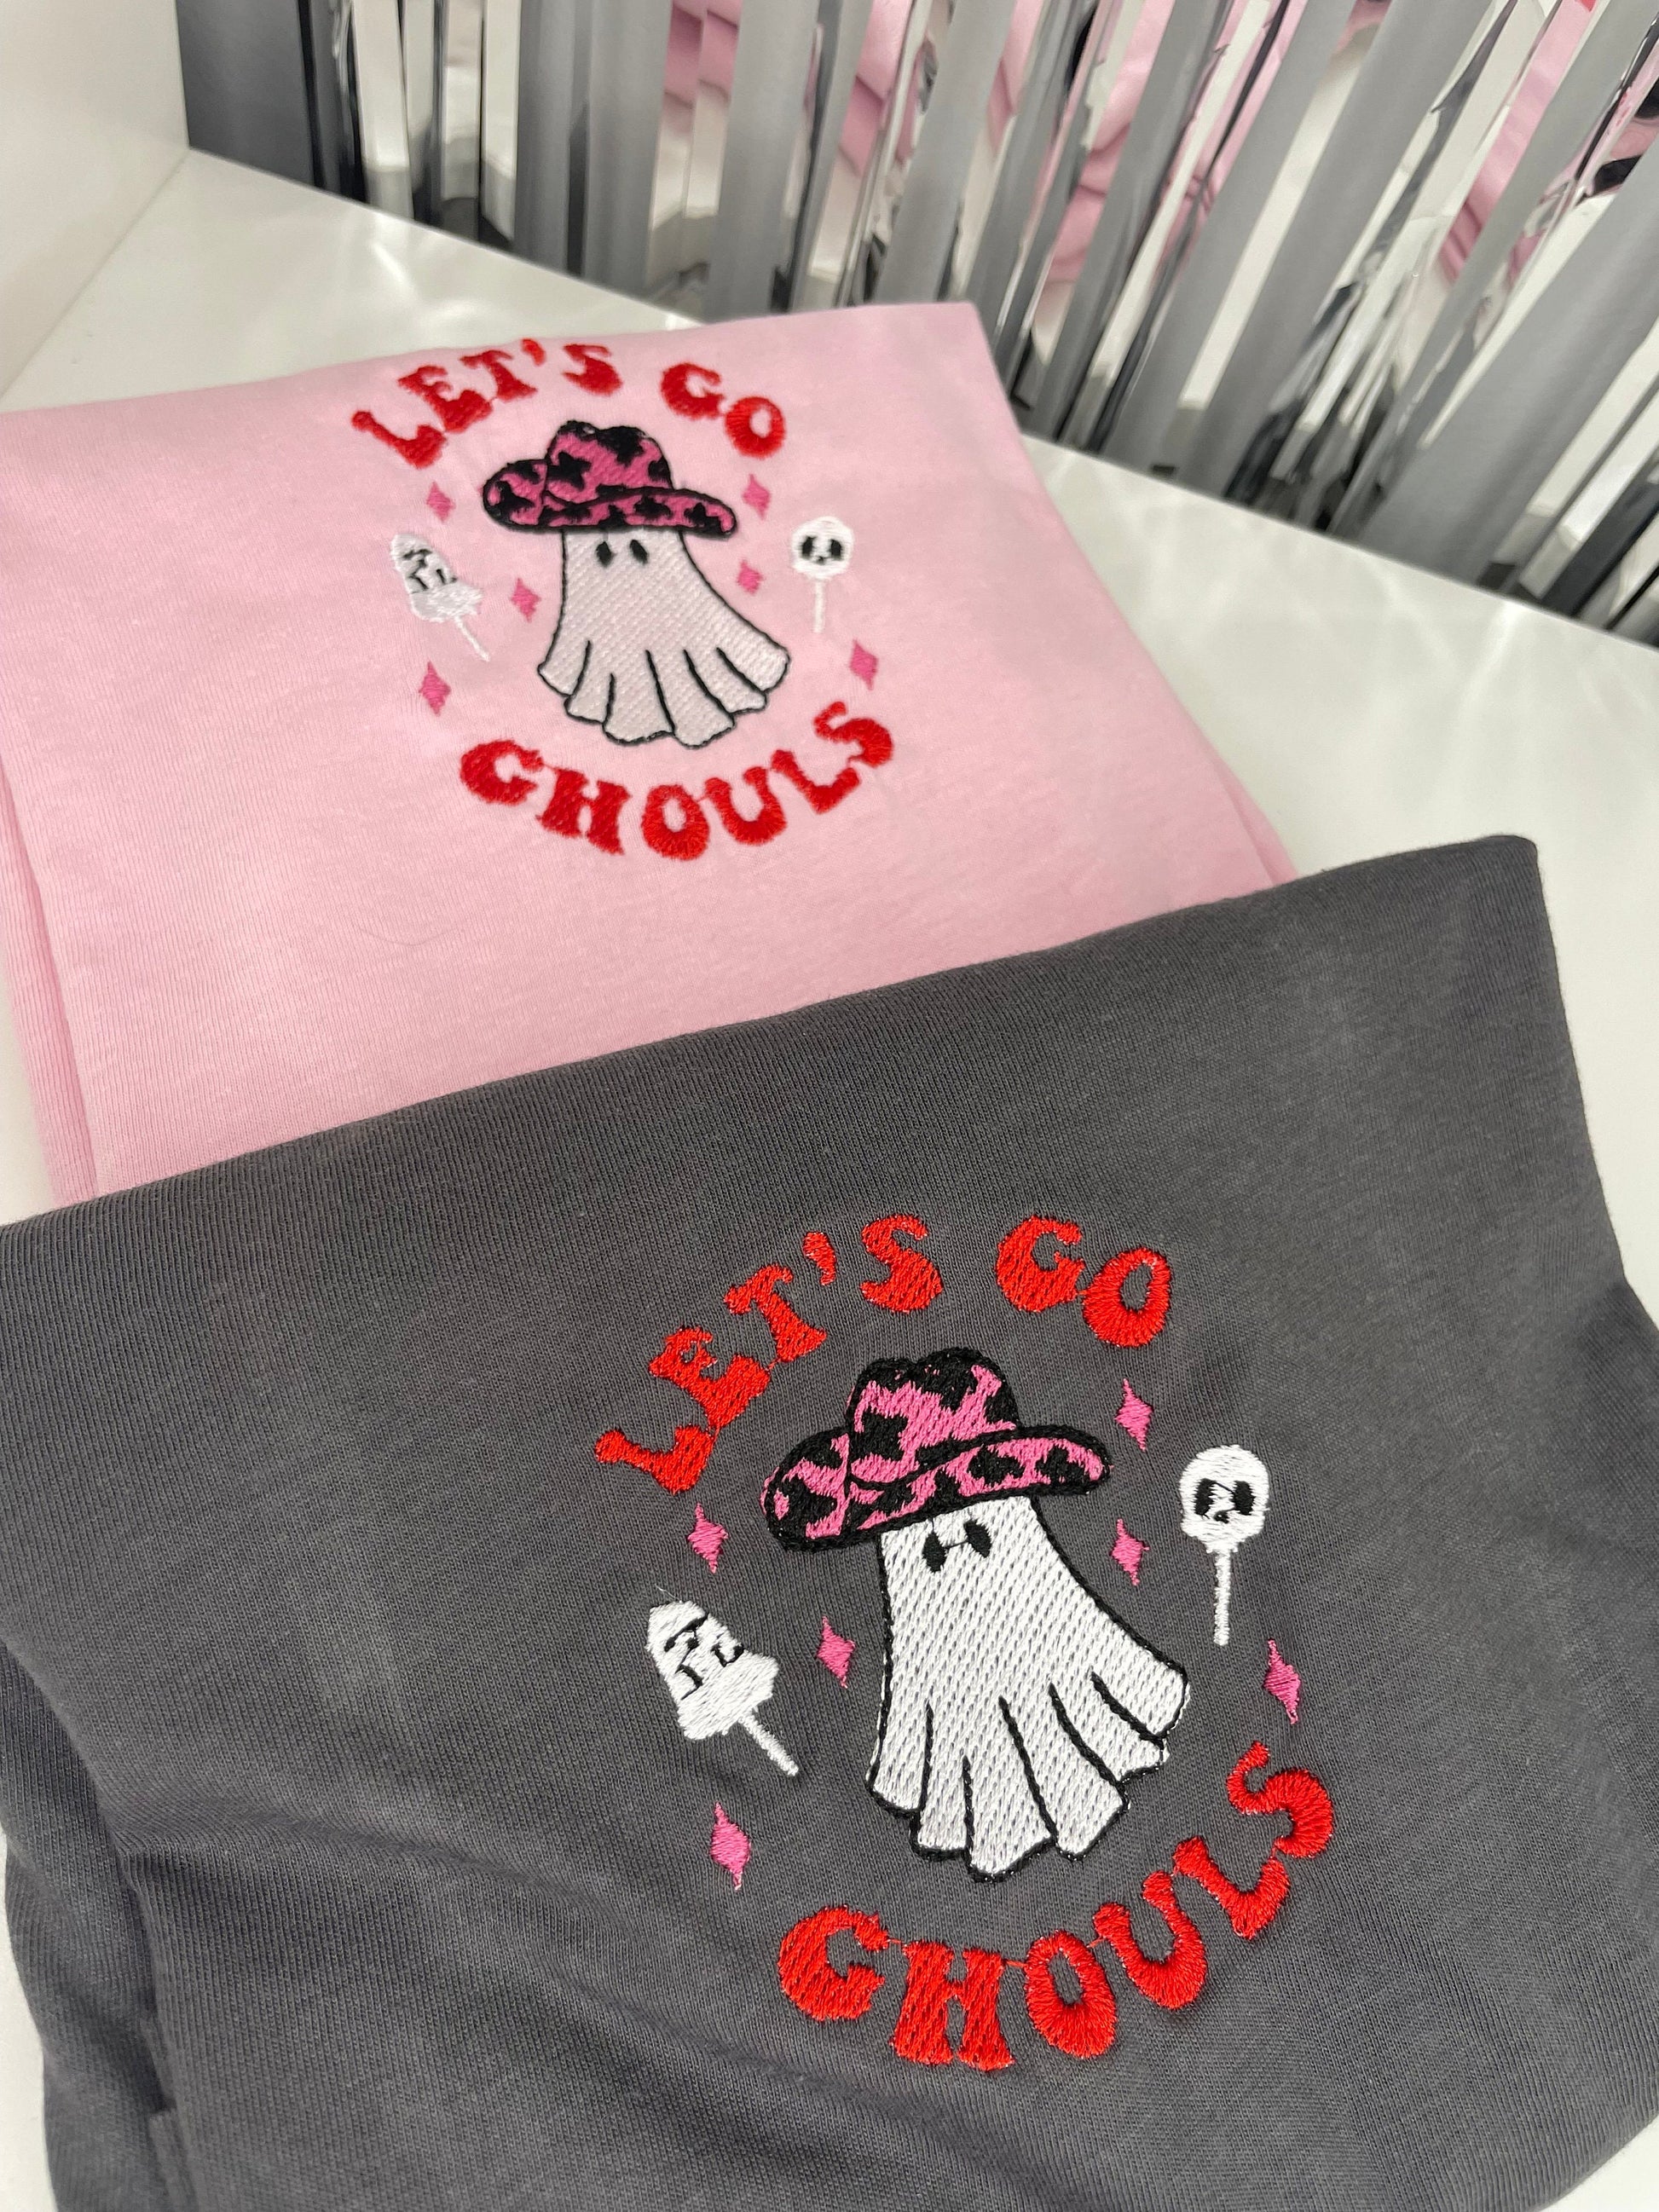 Let’s go ghouls embroidered T-shirt, ghoul gang, ghoul girls unisex tee